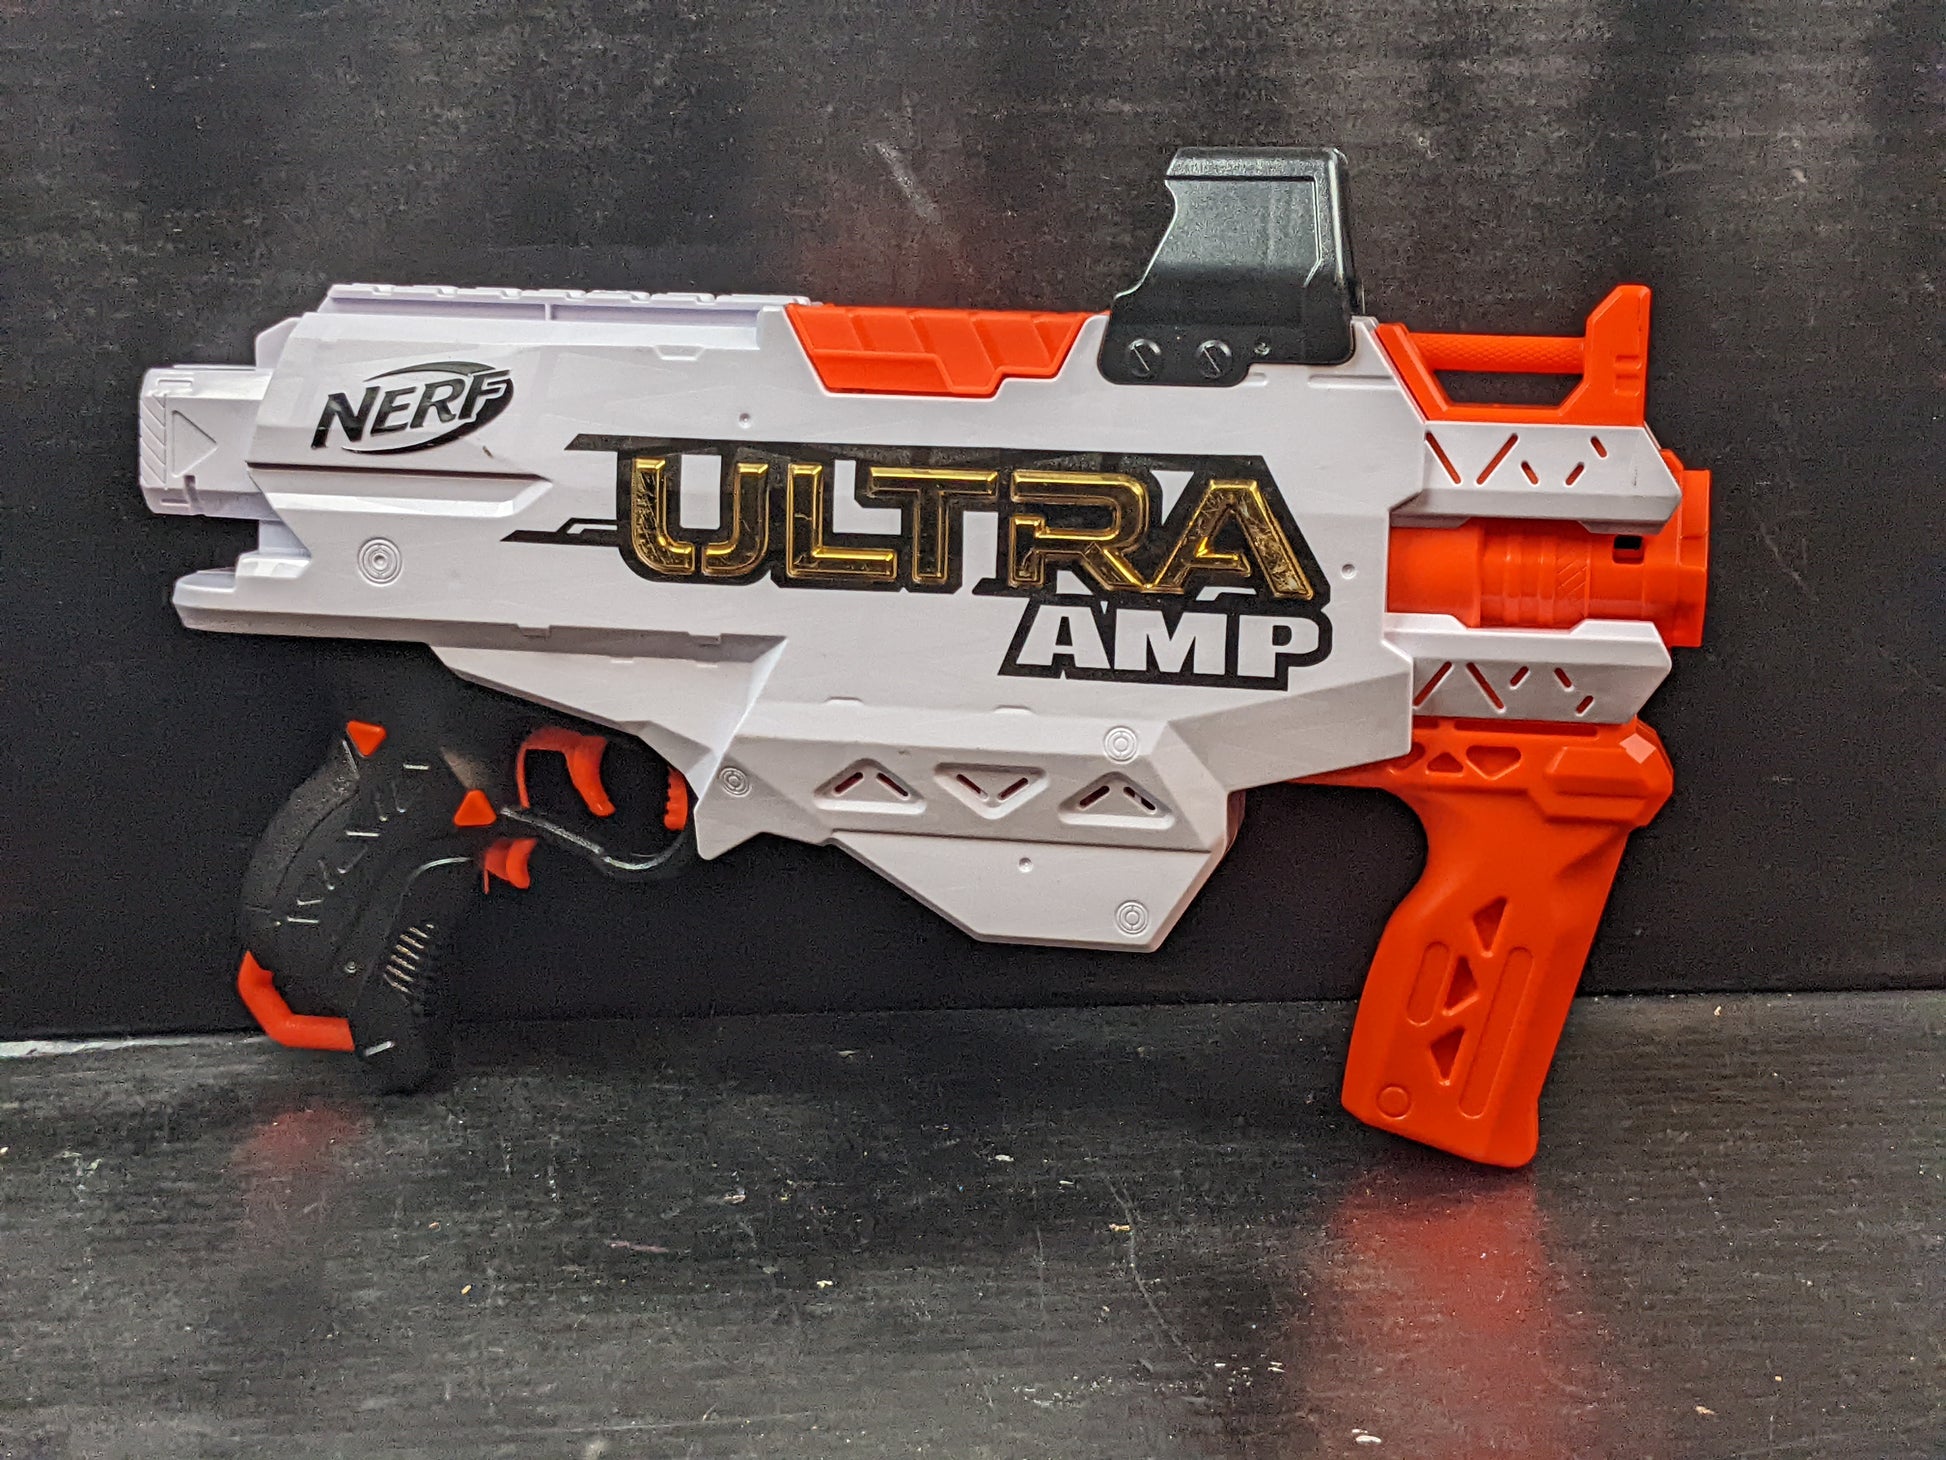 Nerf Ultra Two Blaster, 1 ct - Smith's Food and Drug